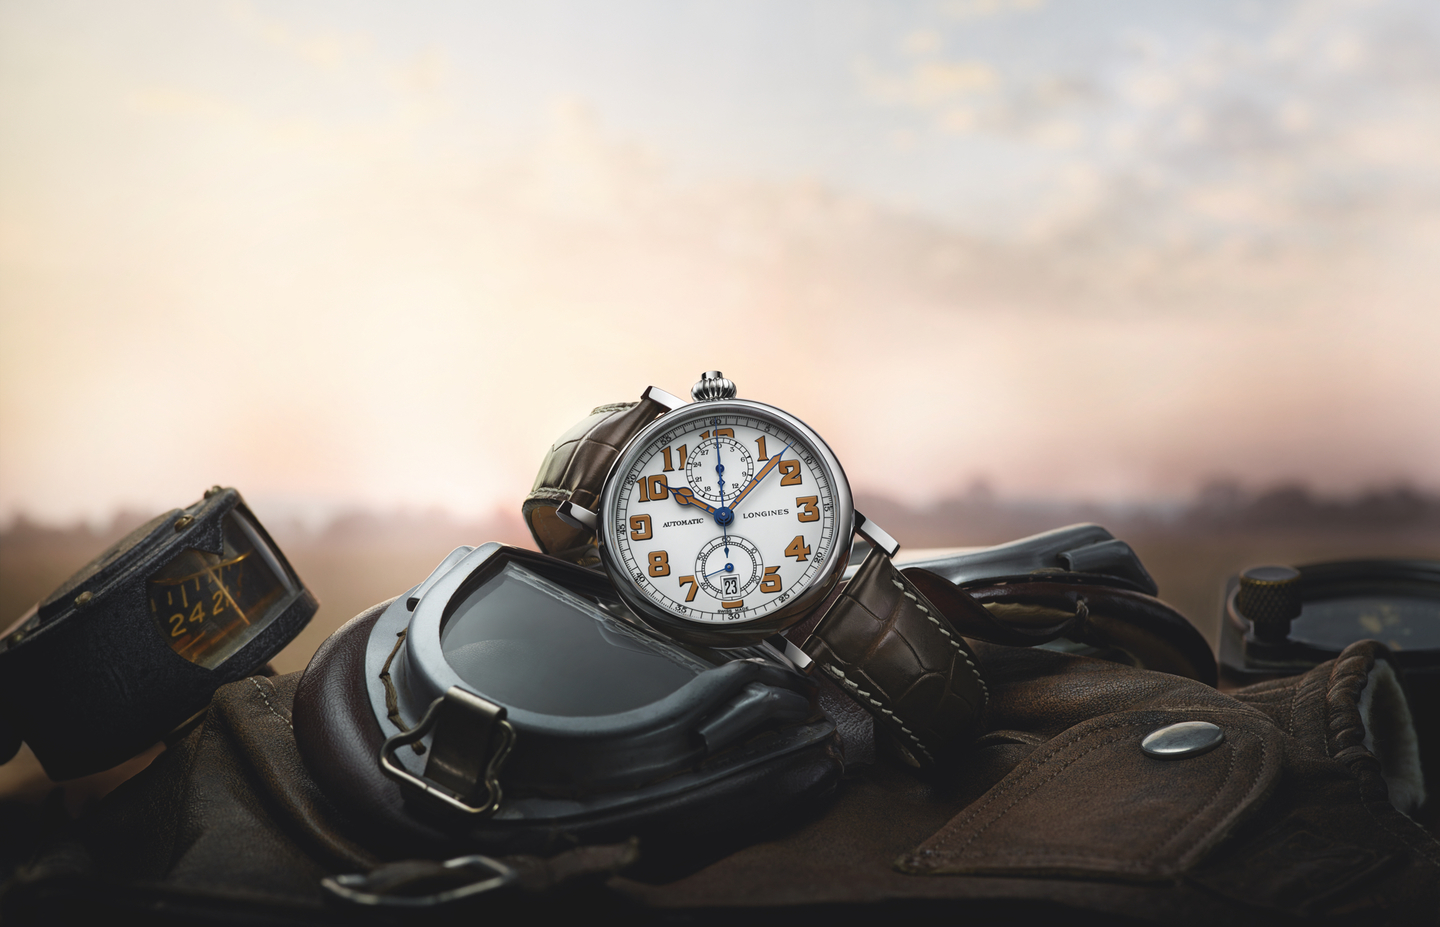 Introducing the Longines Avigation Watch Type A-7 1935